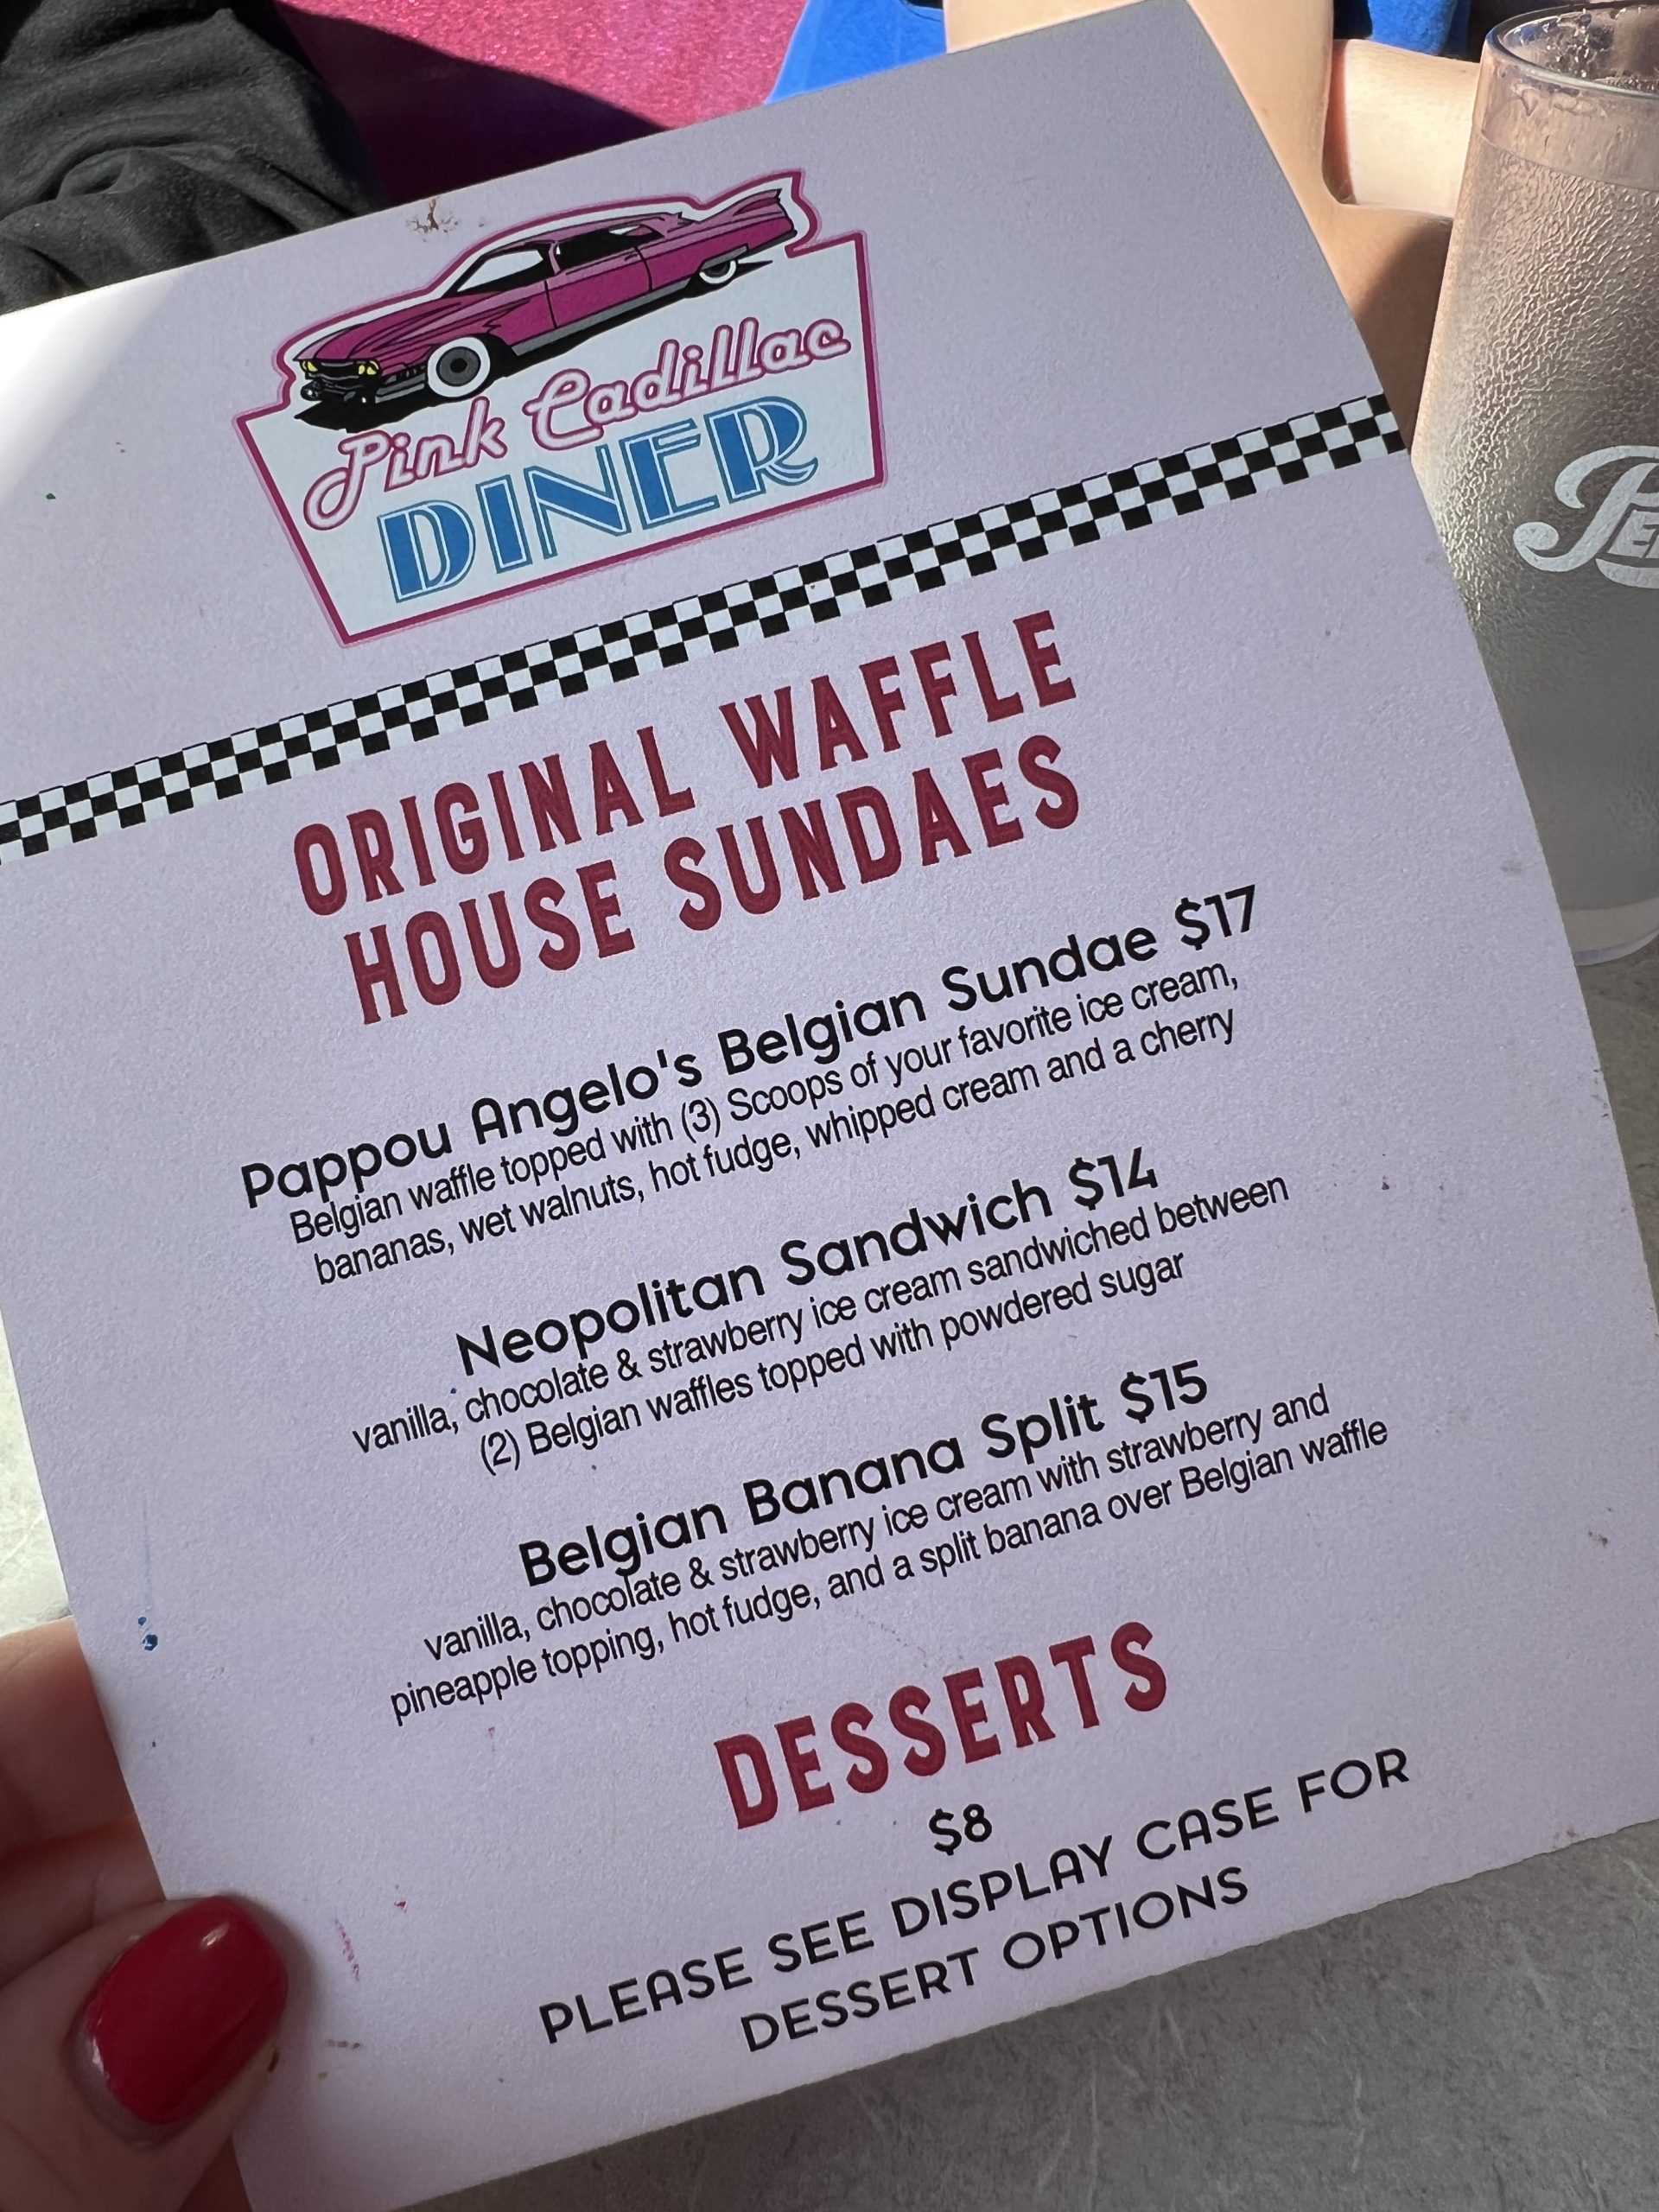 Dessert Menu at The Pink Cadillac Diner in Wildwood New Jersey